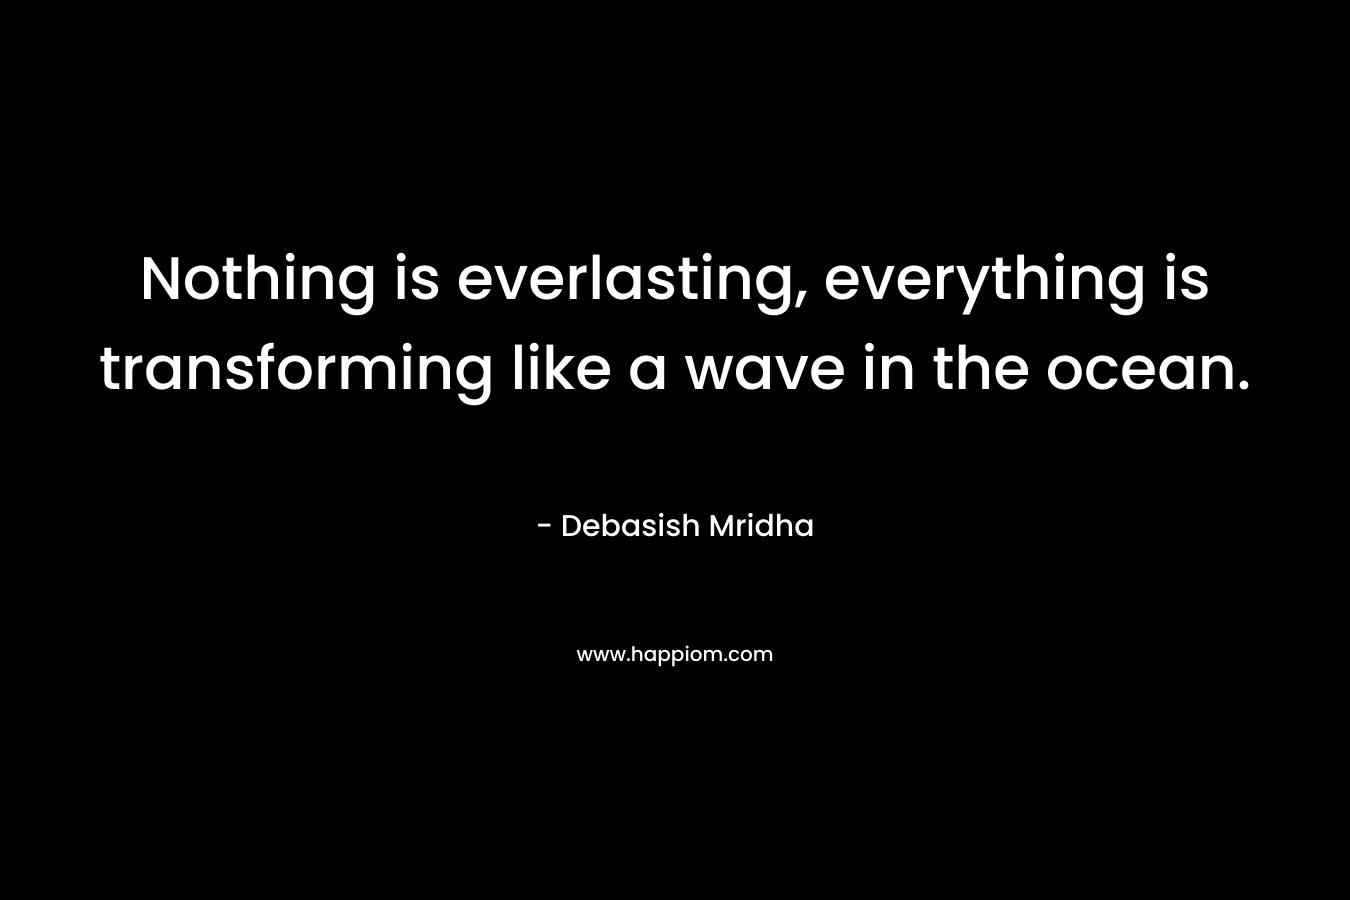 Nothing is everlasting, everything is transforming like a wave in the ocean. – Debasish Mridha